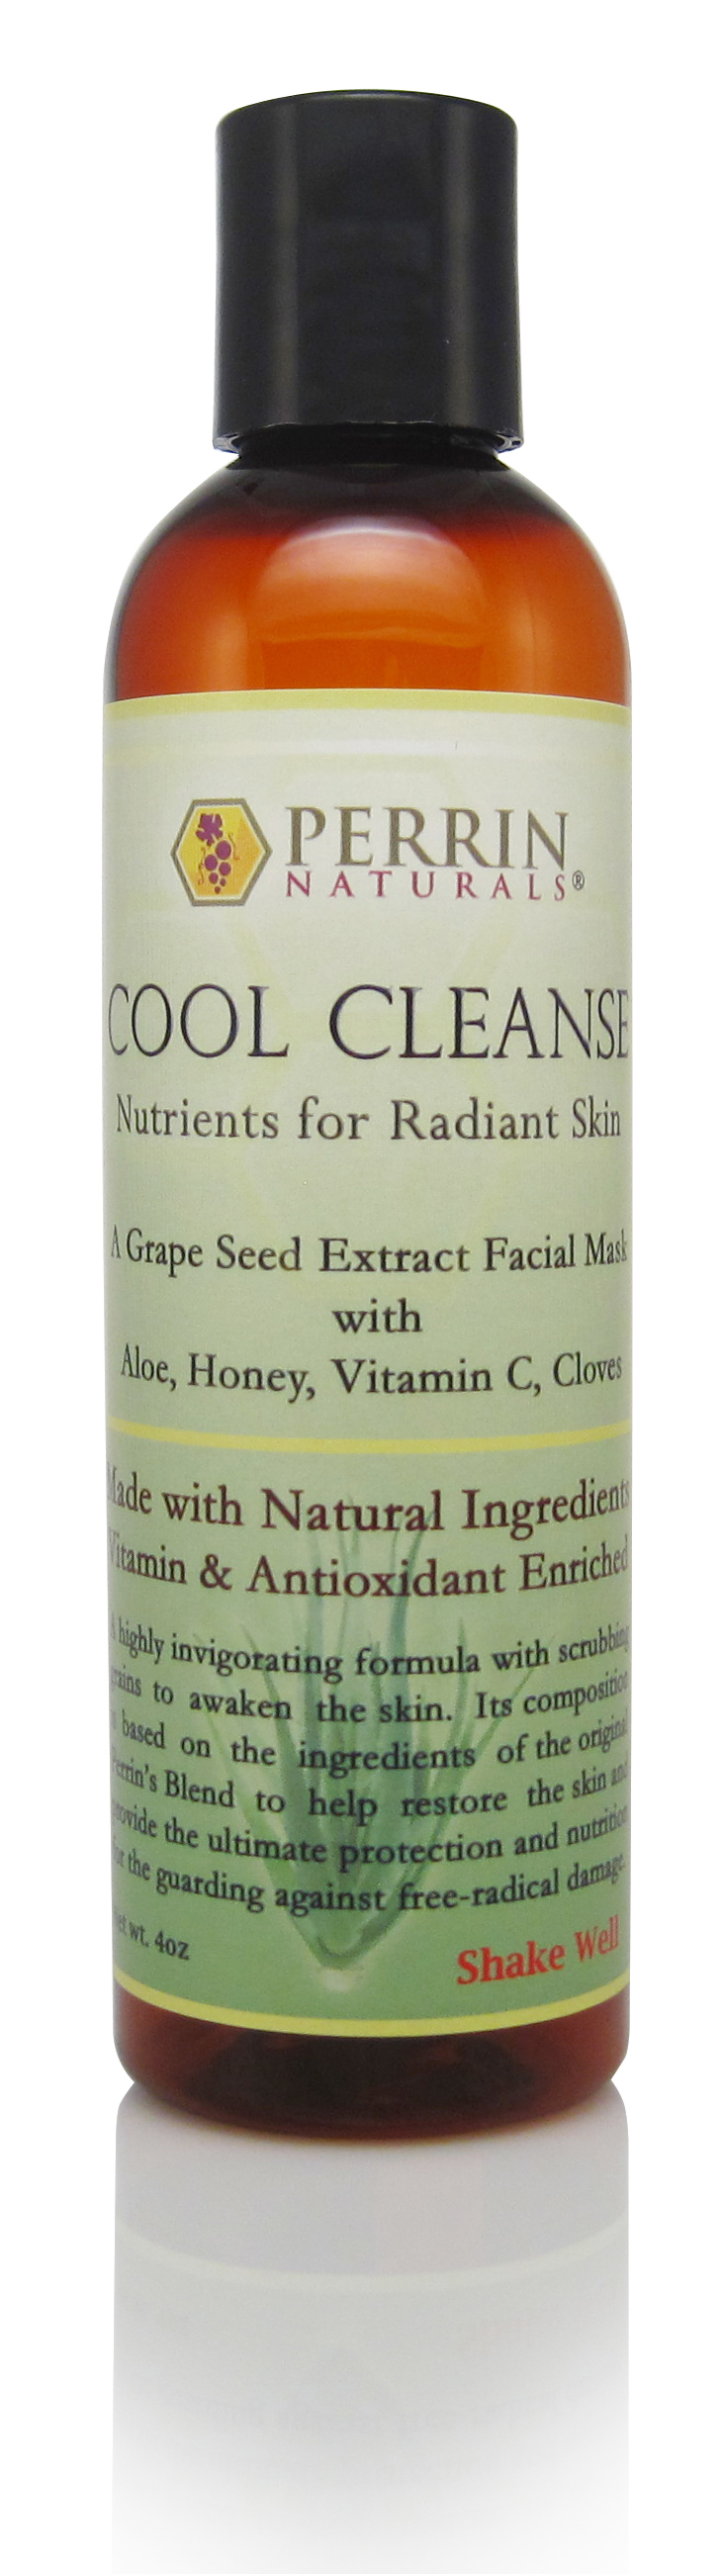 cool cleanse therapeutic skin care